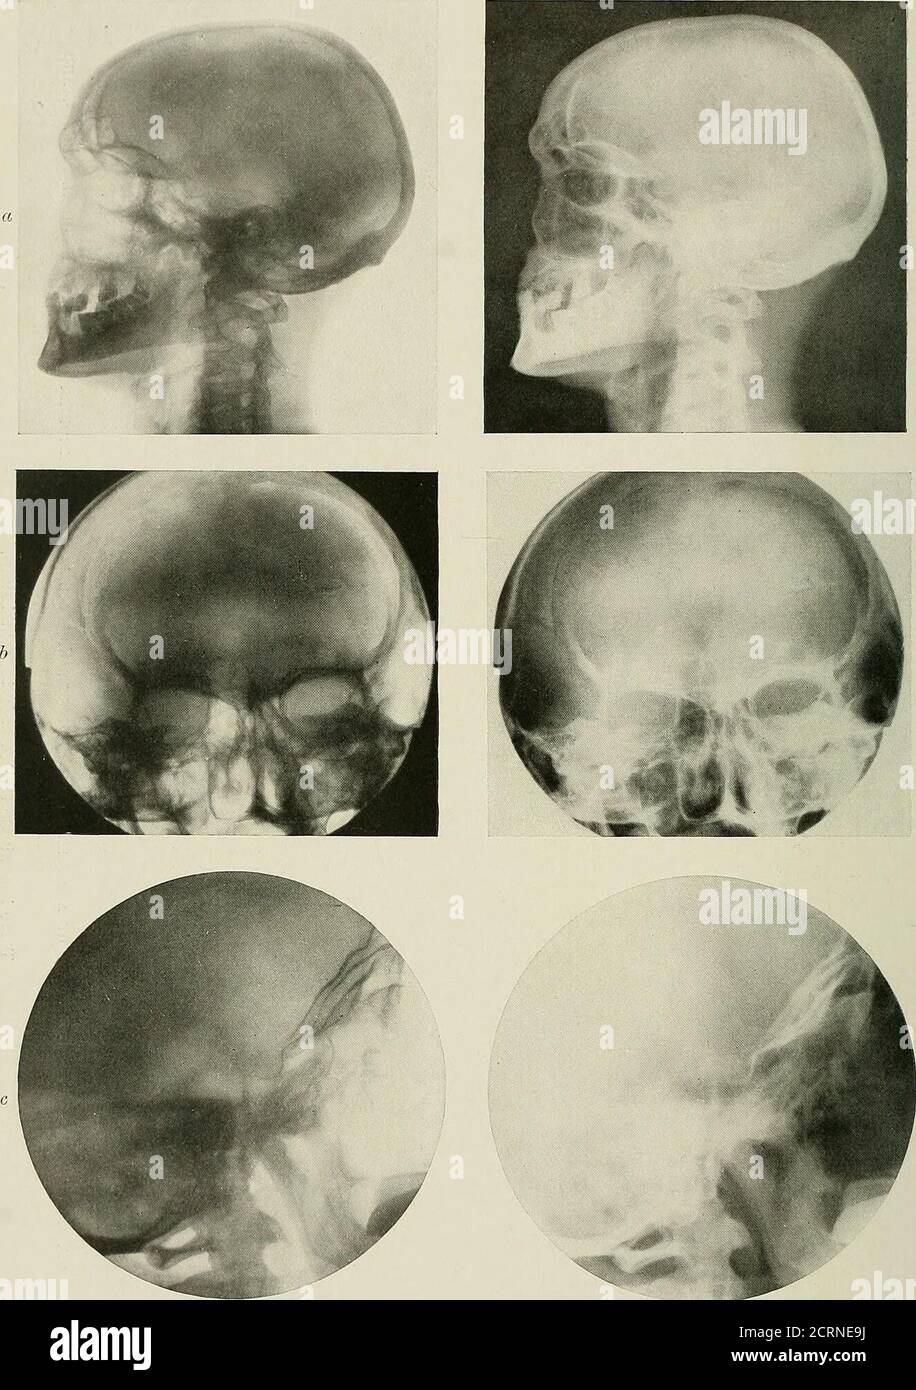 Radiography and radio-therapeutics . O ca a &lt;. PLATE XV.—Normal Skdlls.  a, Lateral view of normal skull, showing frontal sinuses, sphenoidal  sinuses, sella turcica, temporal bones,cervical vertebras, and lower jaw. b,